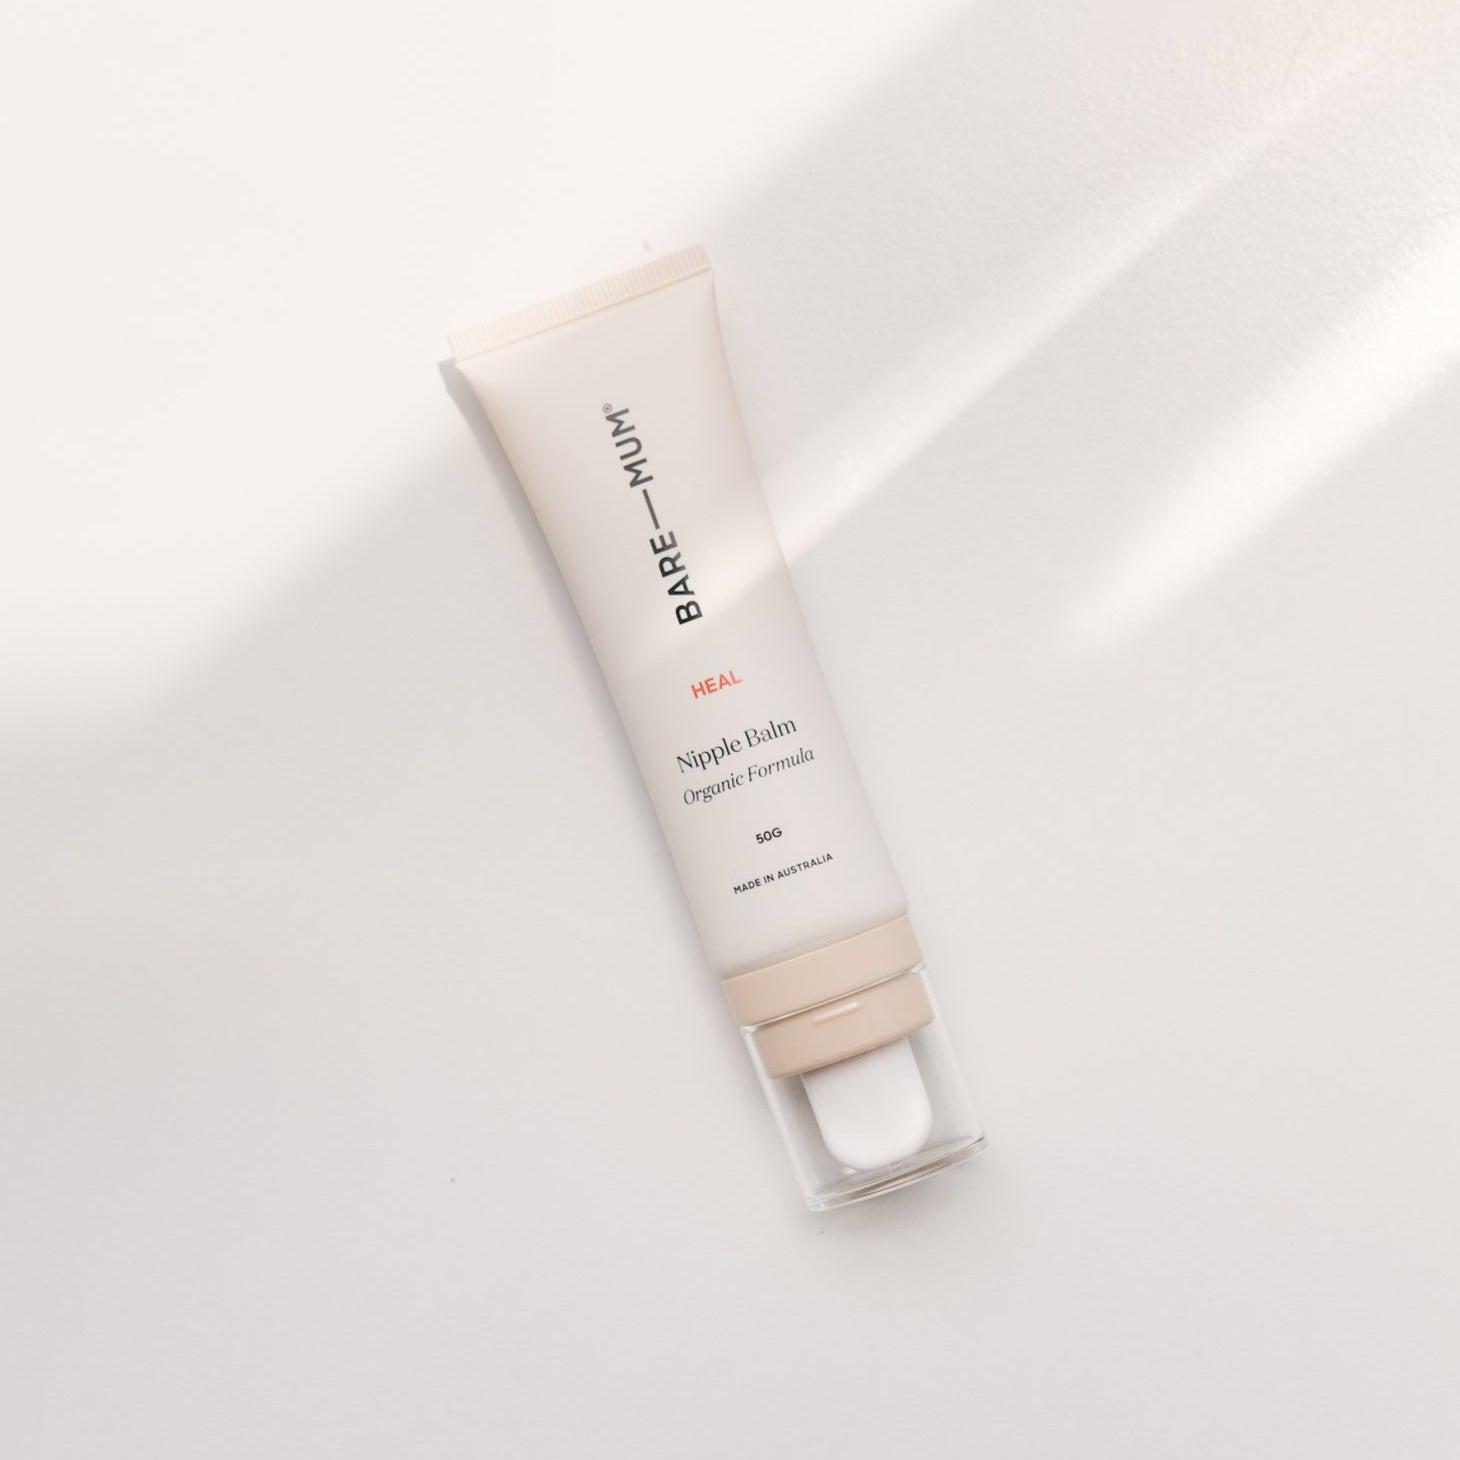 A tube of Bare Mum Nipple Balm for breastfeeding mothers, displayed on a white surface.